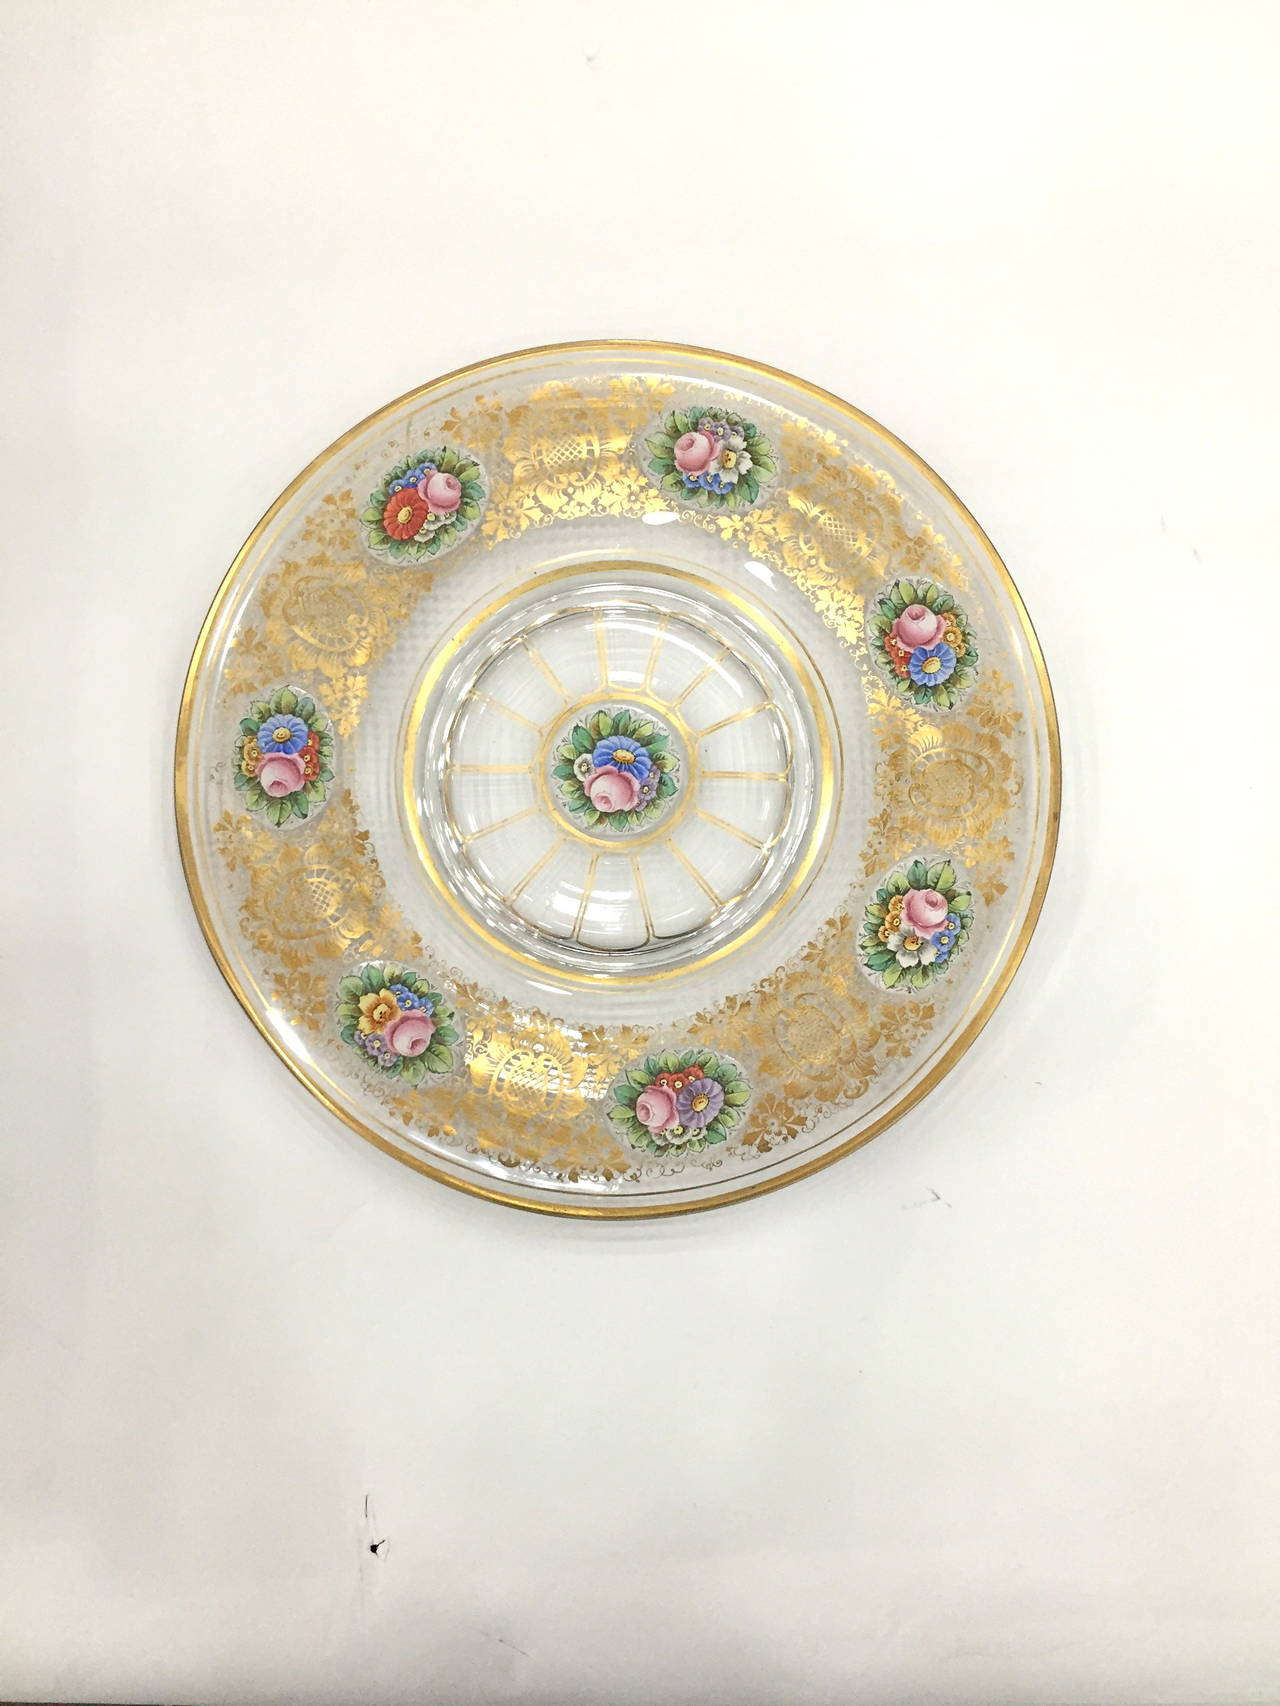 Rare Set of 12 Moser Glass Service Plates, circa 1900 In Excellent Condition For Sale In Redding, CA